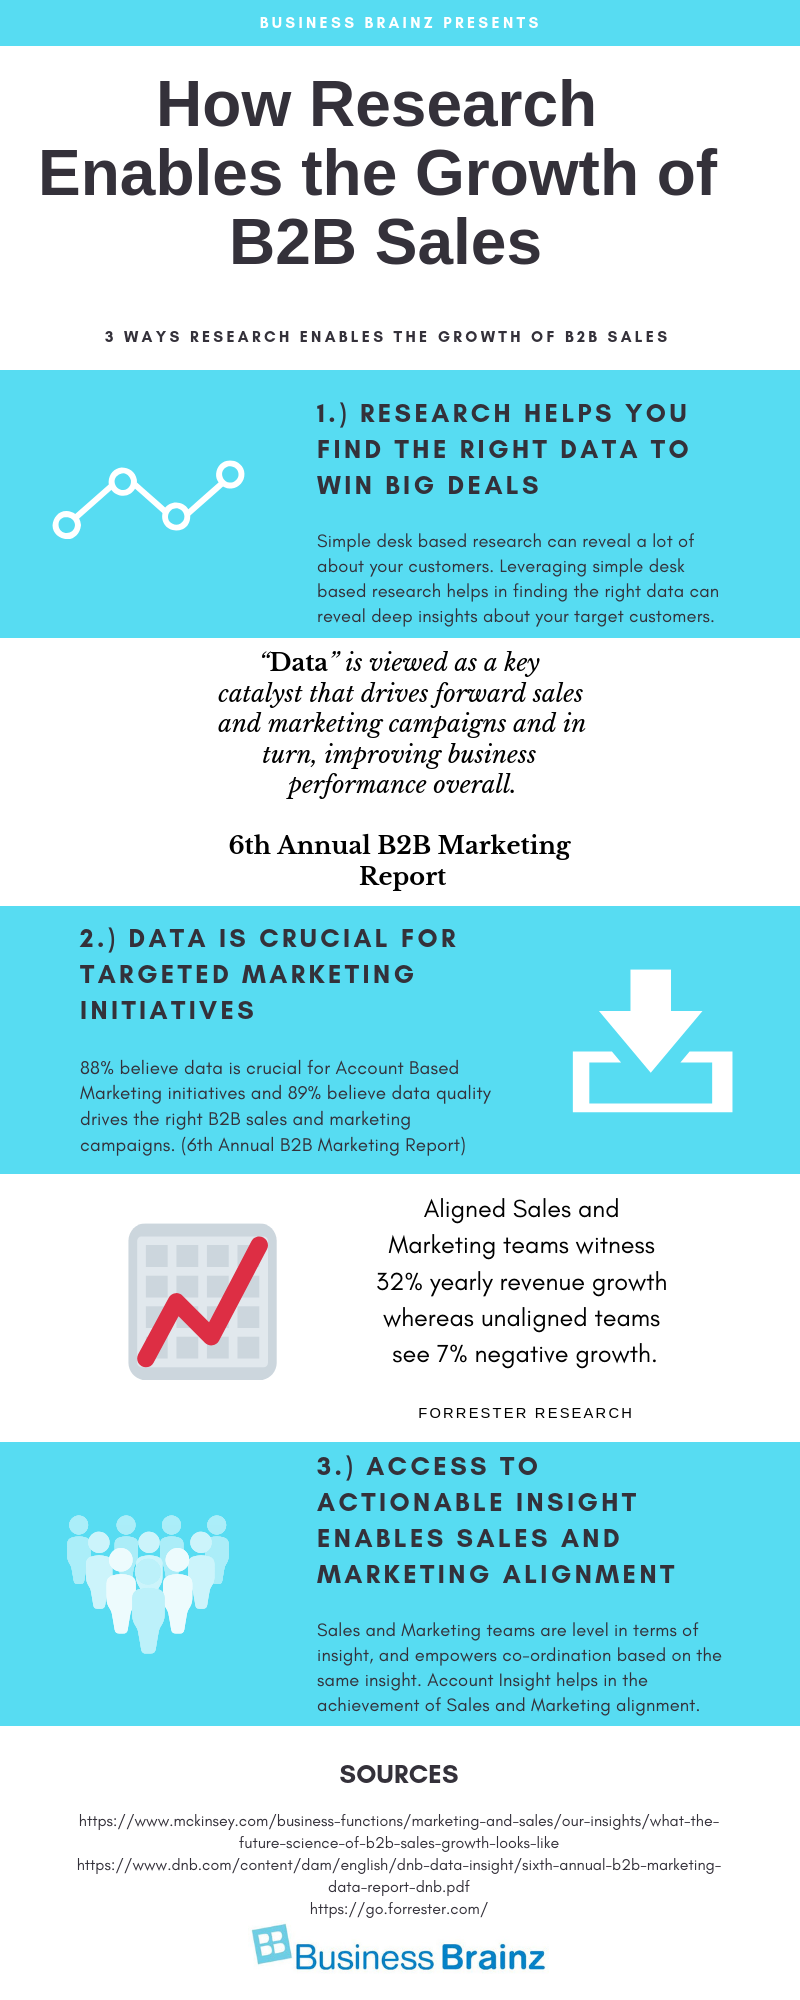 INFOGRAPHIC] How Research Enables the Growth of B2B Sales | Business Brainz